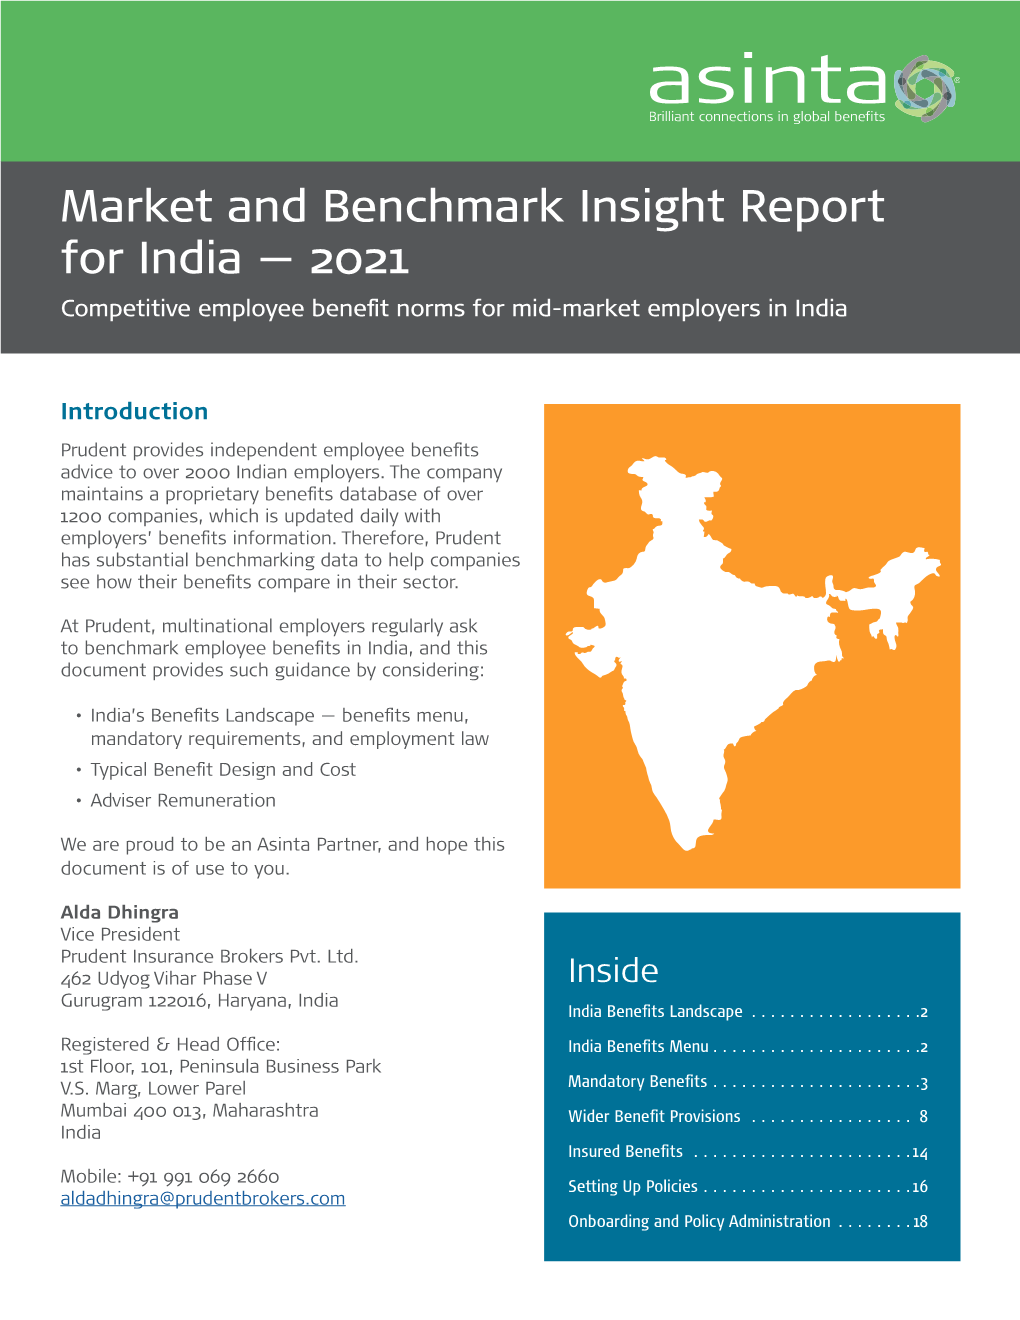 Market and Benchmark Insight Report for India — 2021 Competitive Employee Benefit Norms for Mid-Market Employers in India